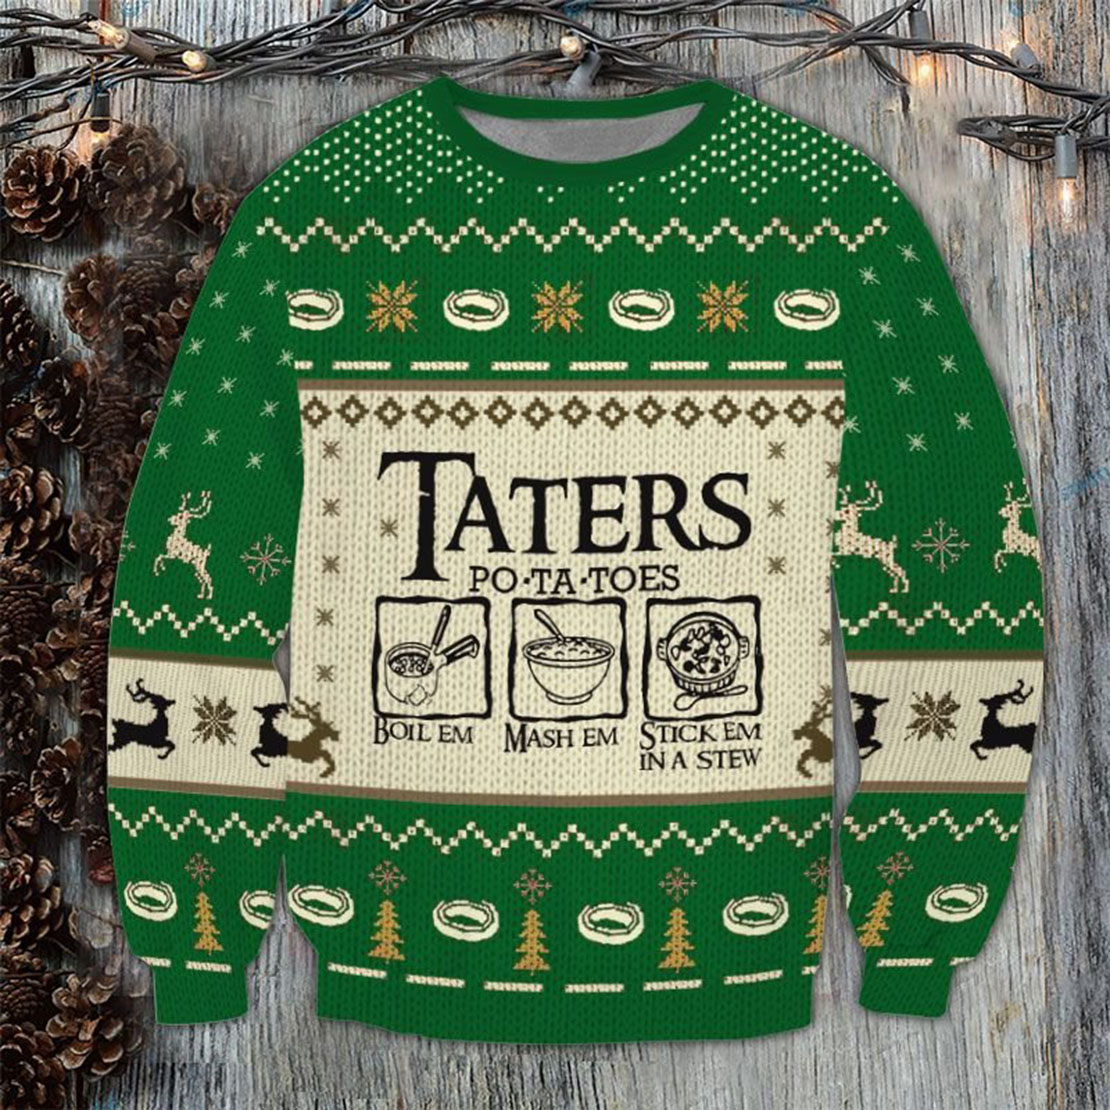 The Lord of the Rings Taters Potatoes Ugly Sweater and jumper